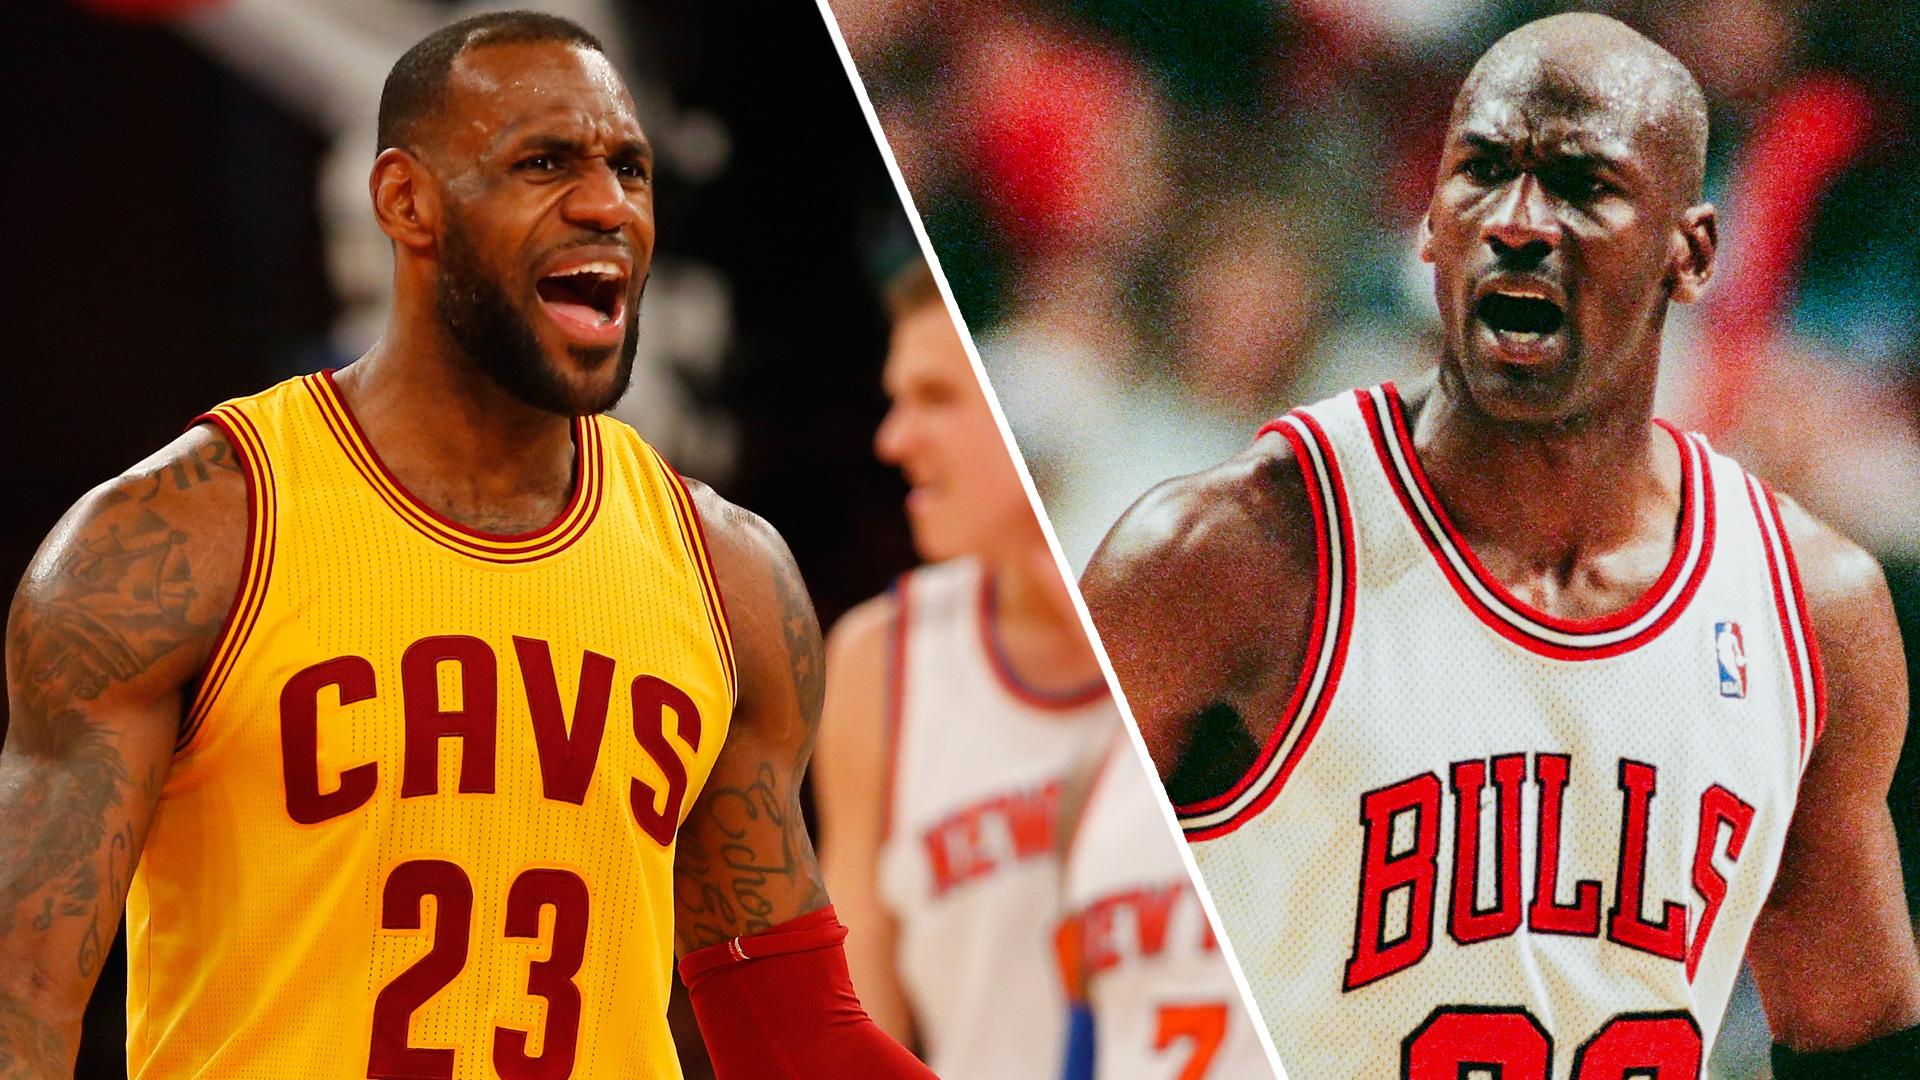 NBA playoffs 2017: Comparing poor performances of LeBron